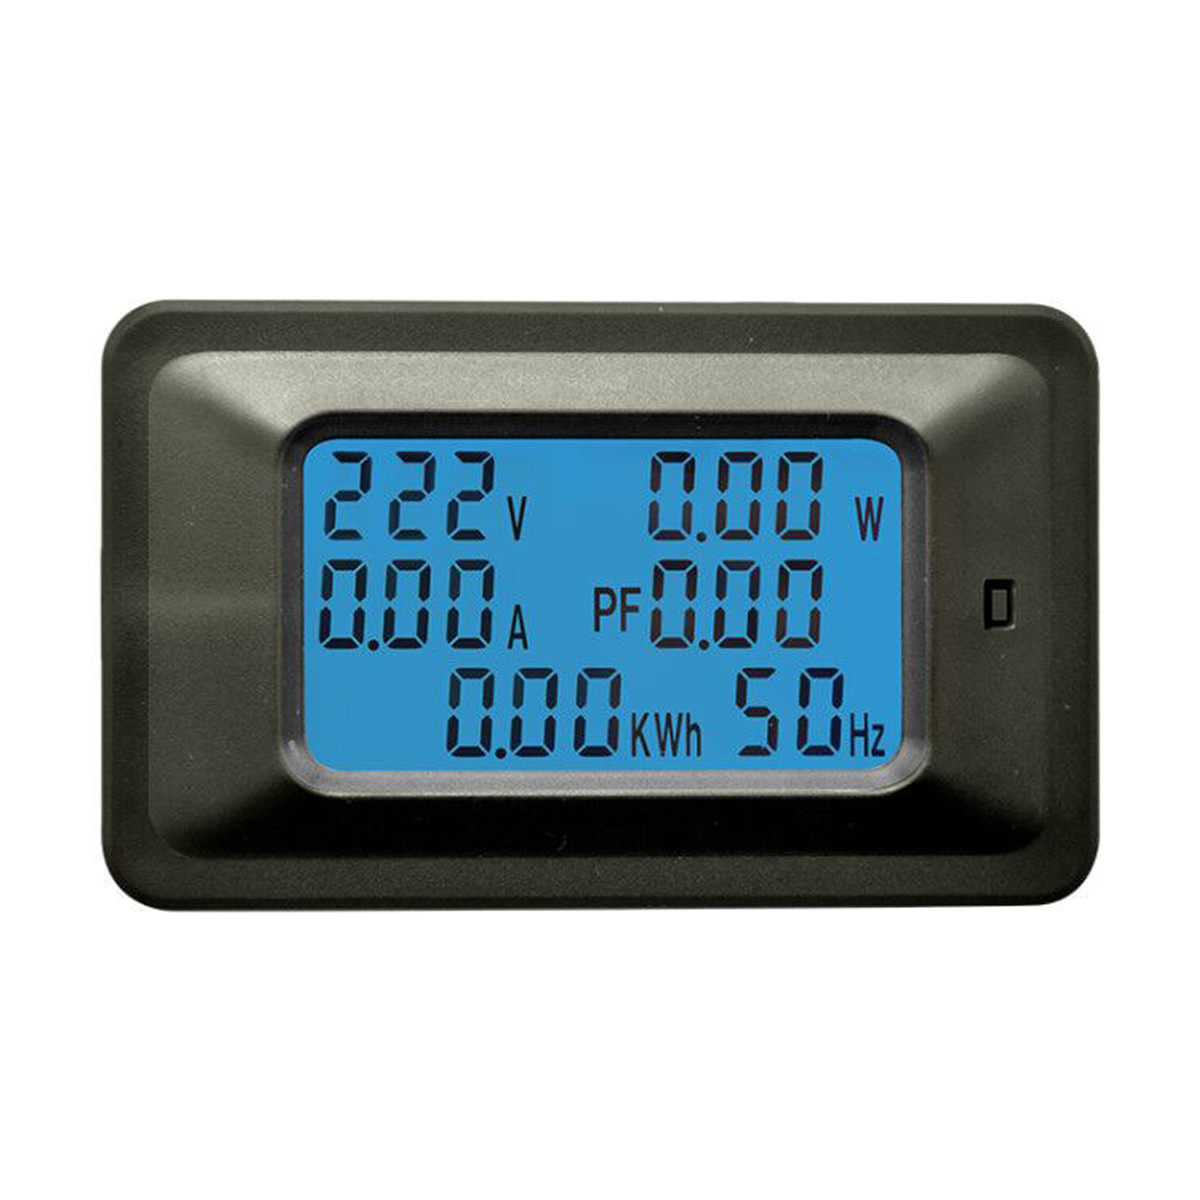 

P06S-100A AC 110-250V Electric Energy Meter Household Multi-function Meter Digital Display Voltage and Current Meter Pow